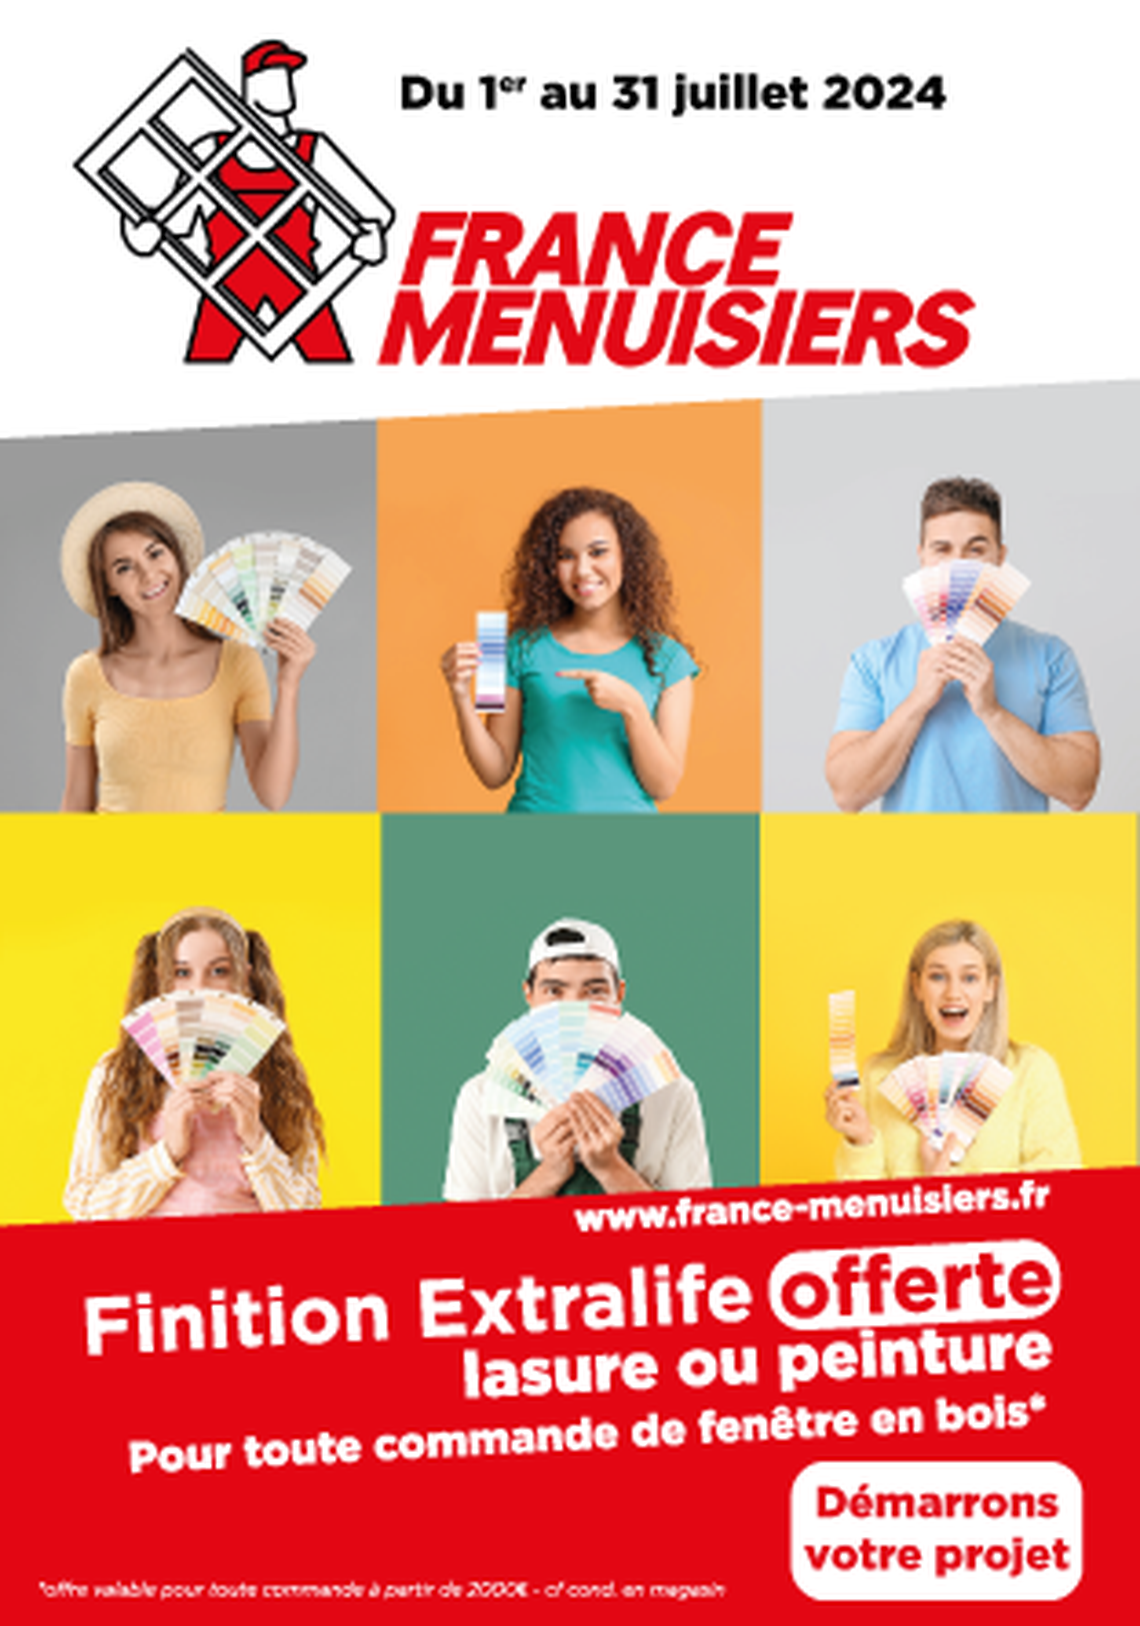 FRANCE MENUISIERS Orléans - Finition Extralife Offerte